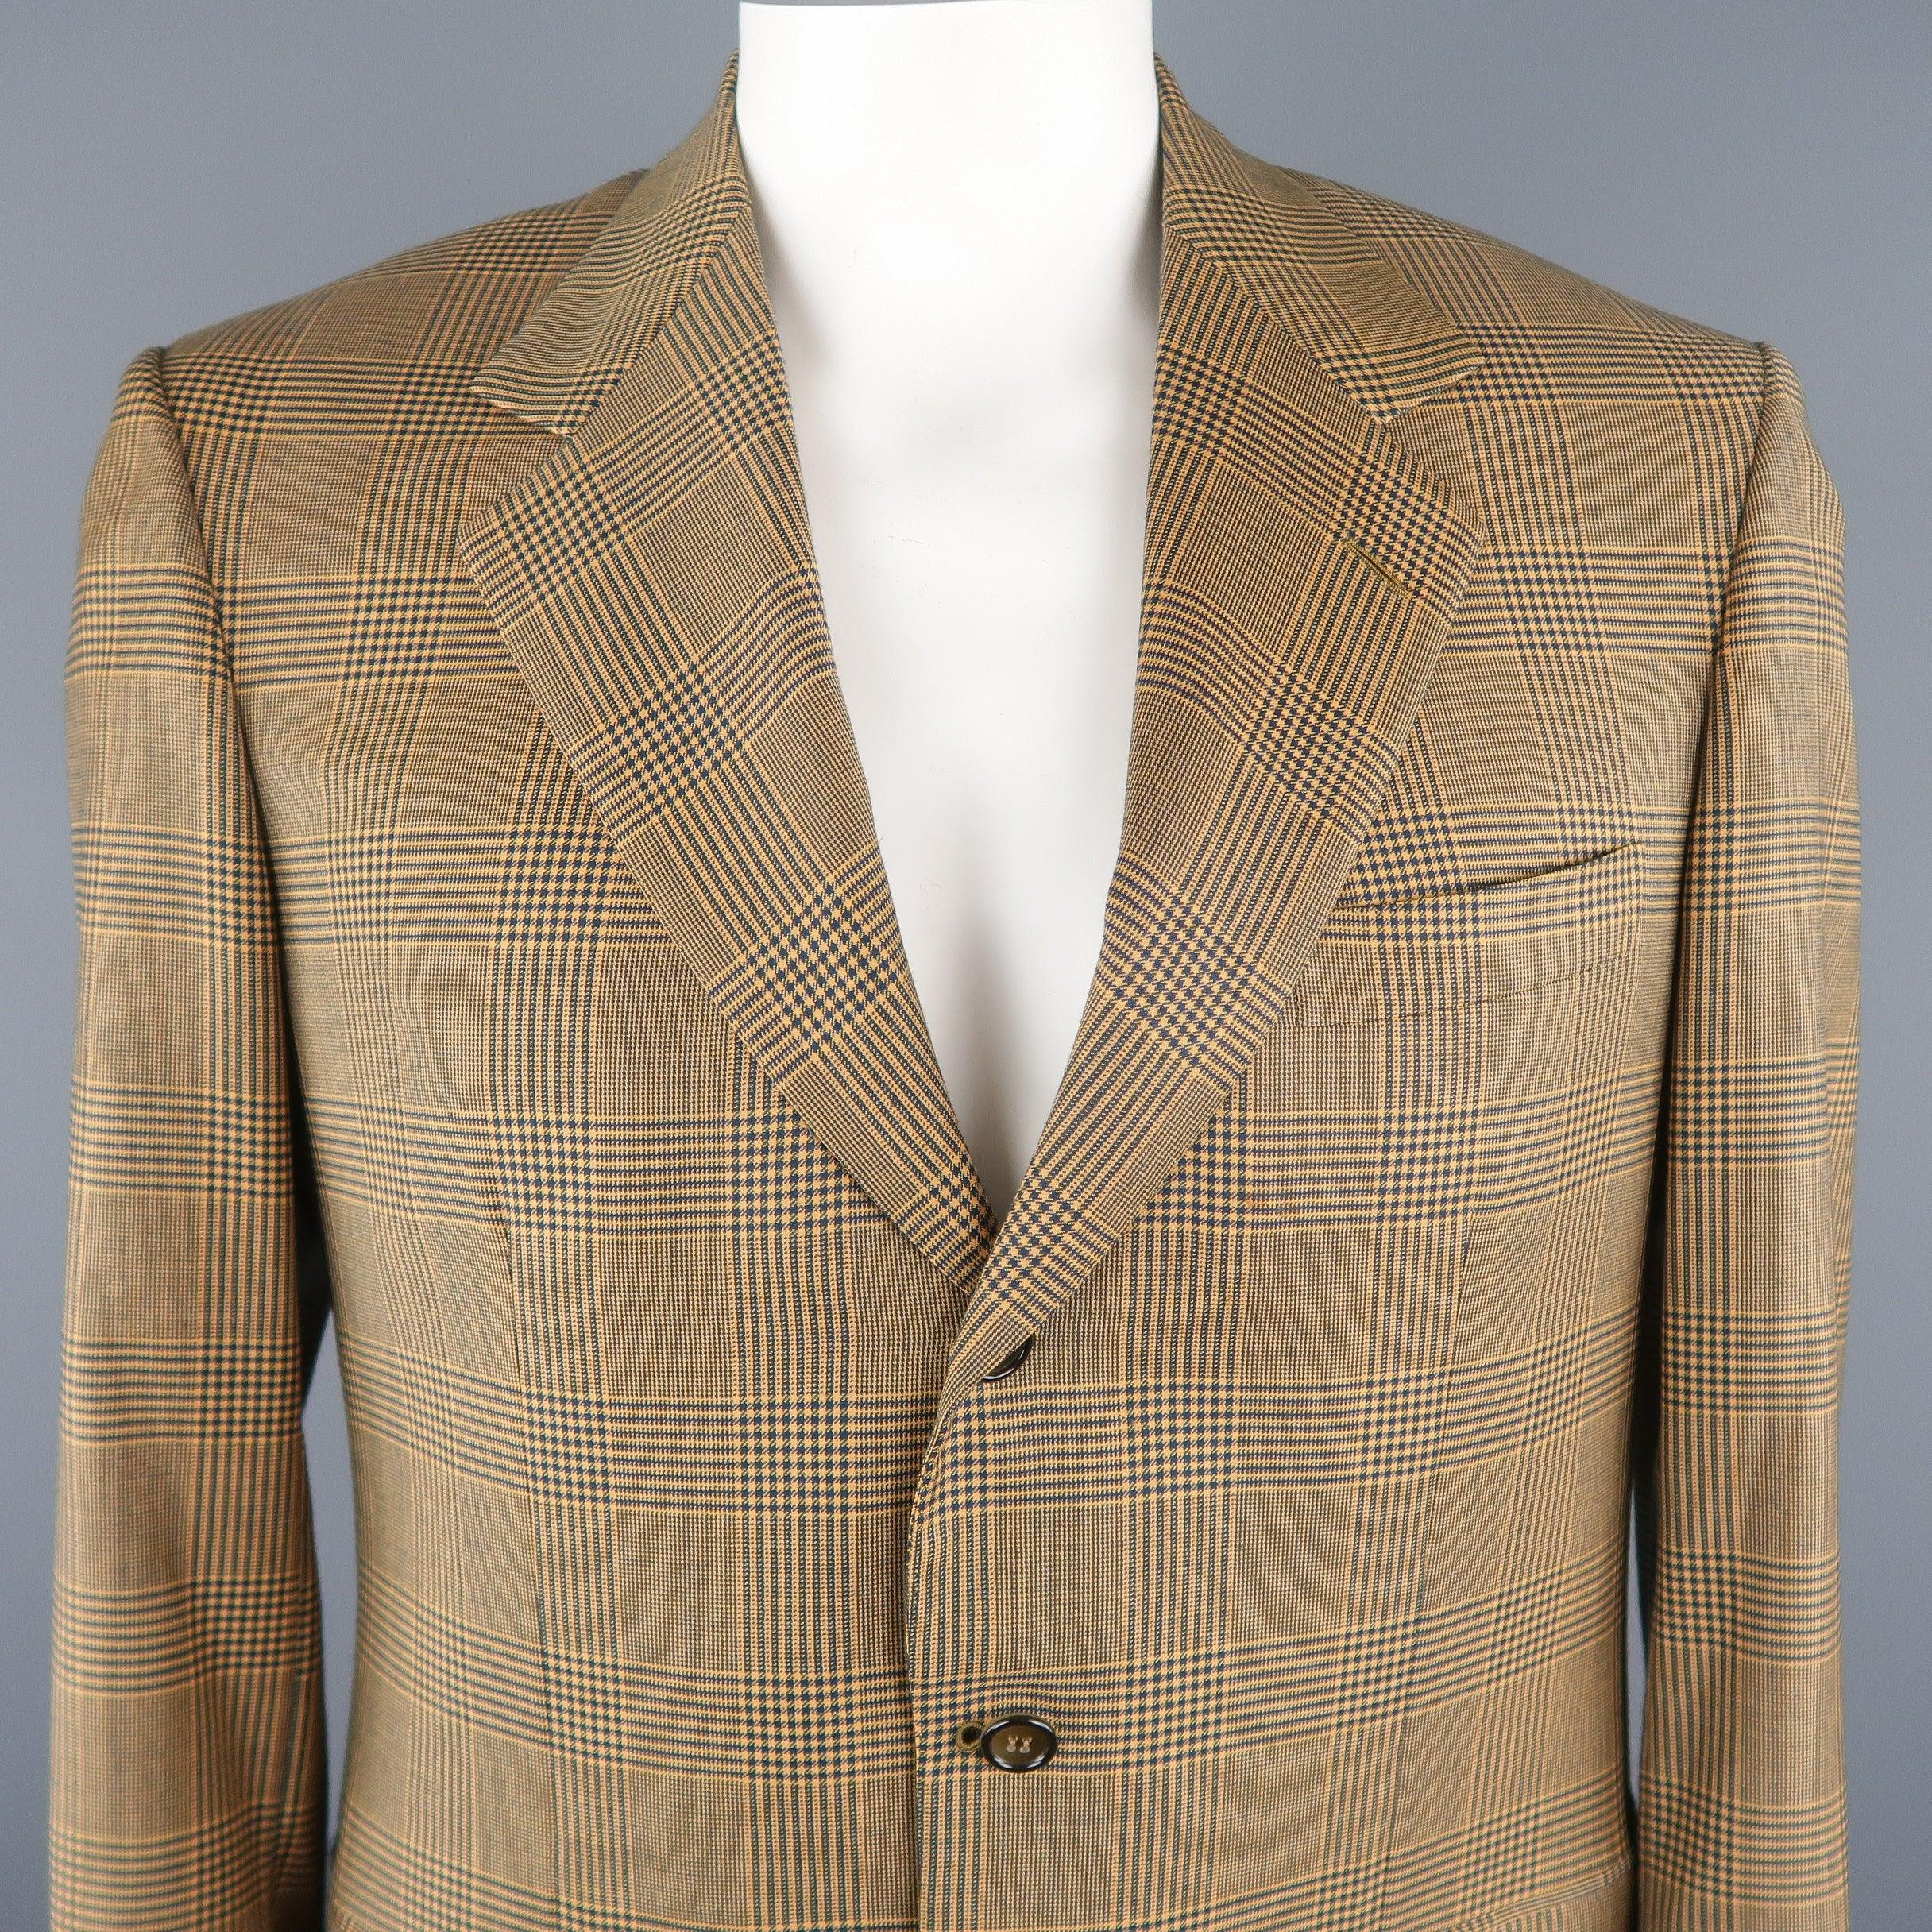 BRIONI blazer comes in gold and navy tones in a plaid wool material, featuring a notch lapel, slit and flap pockets, 3 buttons closure, single breasted. Light spot at front. 
Made in Italy. 
Good Pre-Owned Condition. 

Marked:   50 IT